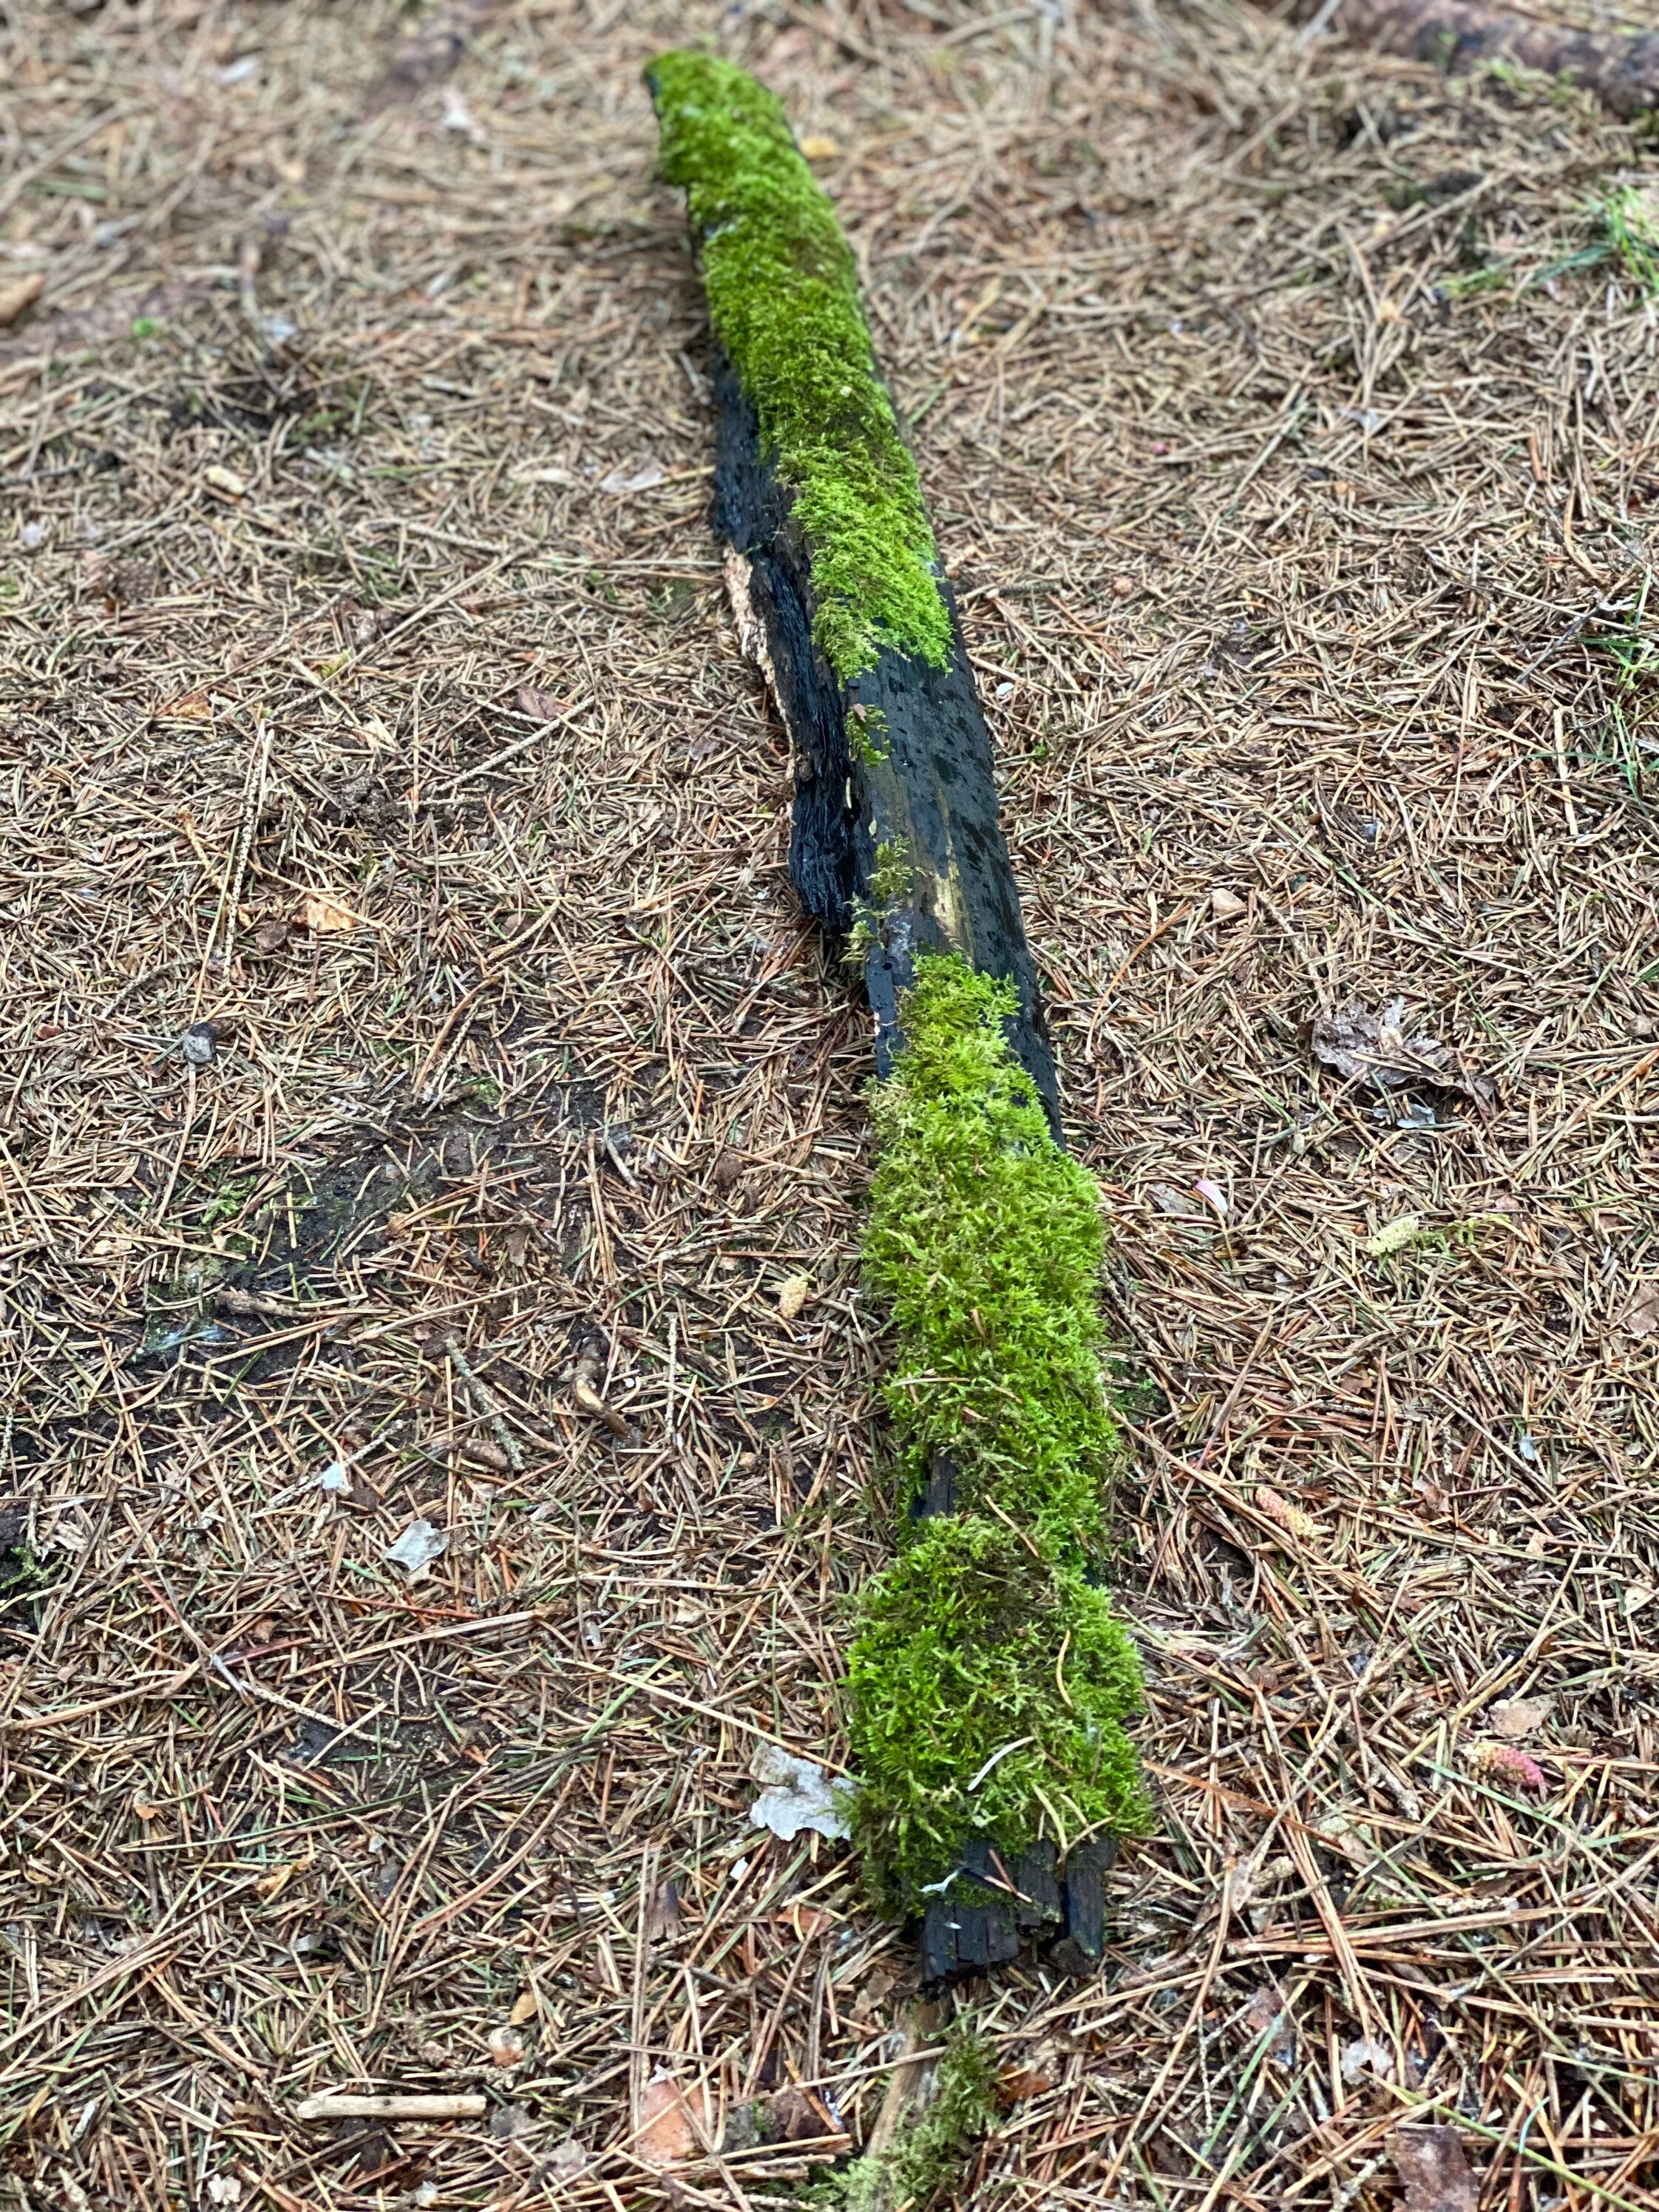 Moss Covered Log, Mossy Log, 29 Inches Long by 3 Inches Wide and 3 Inches High